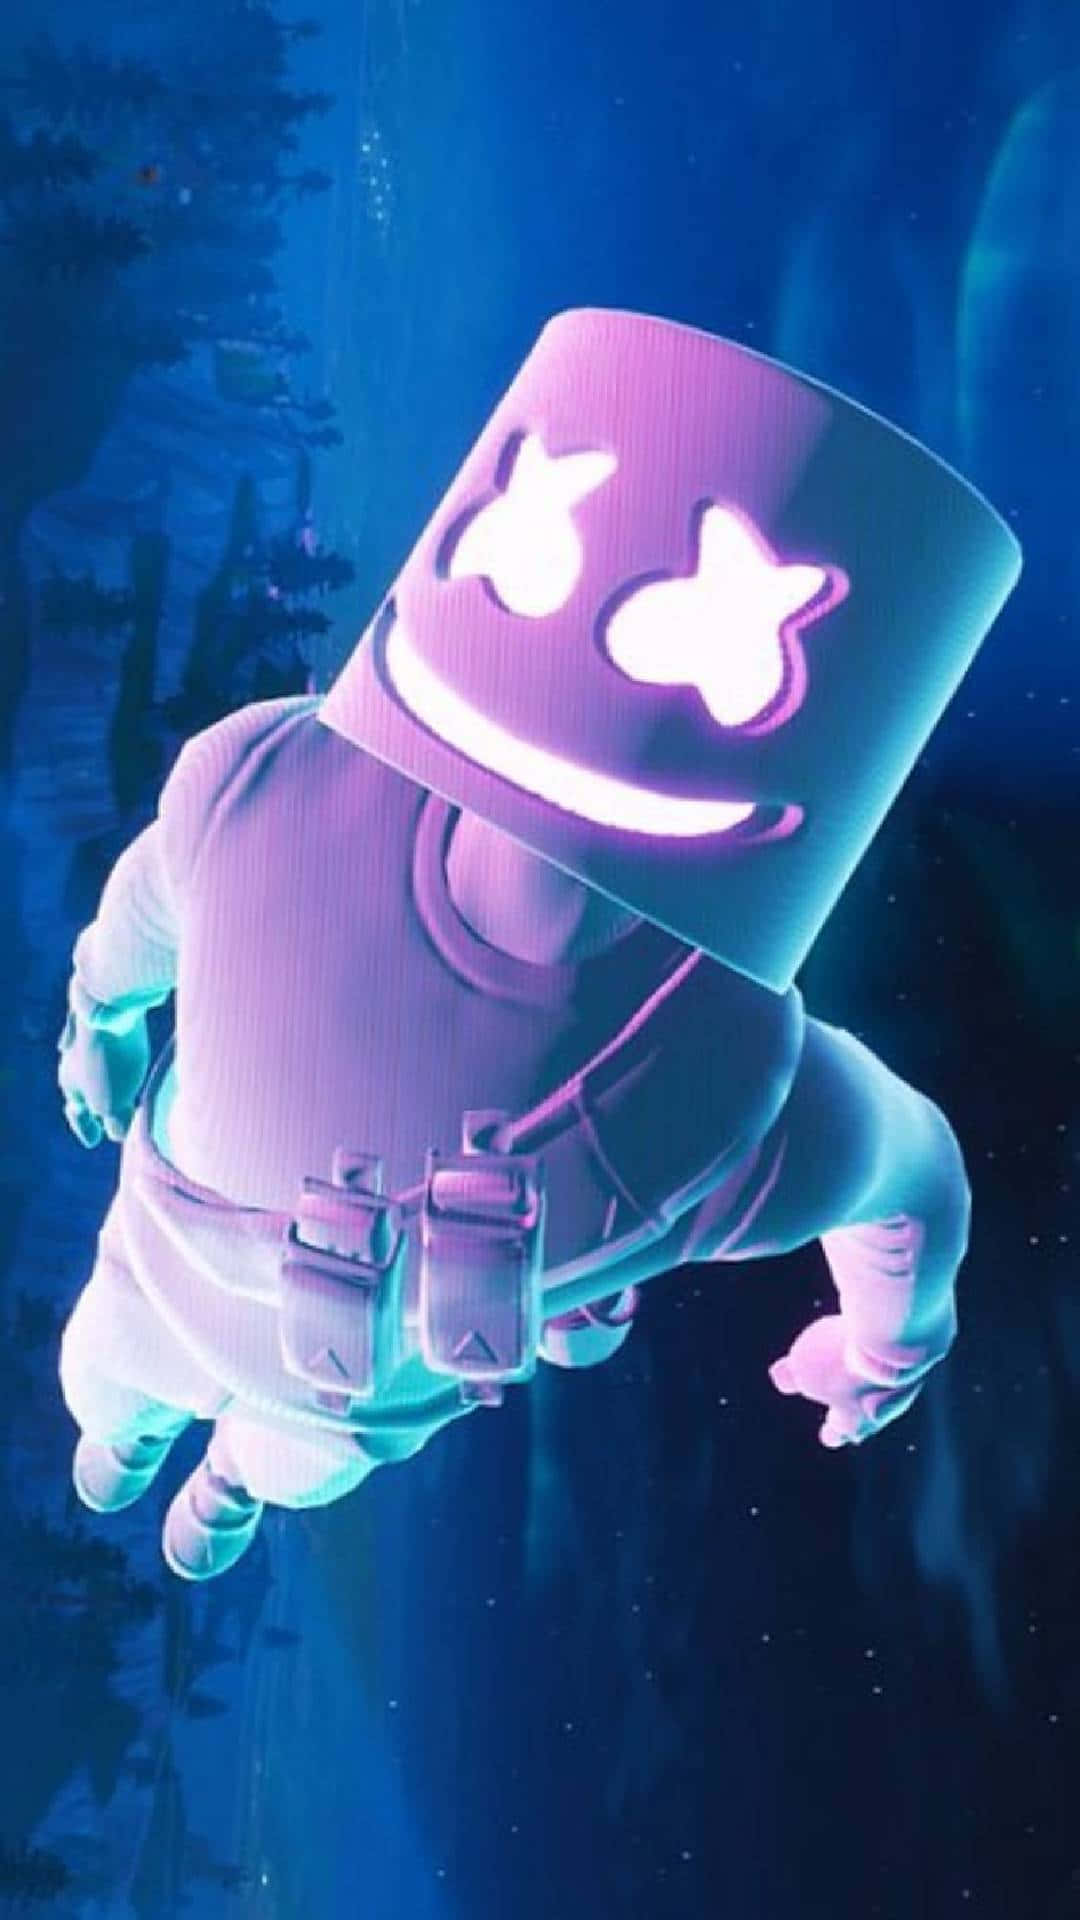 Download This Fortnite Iphone Wallpaper Now!